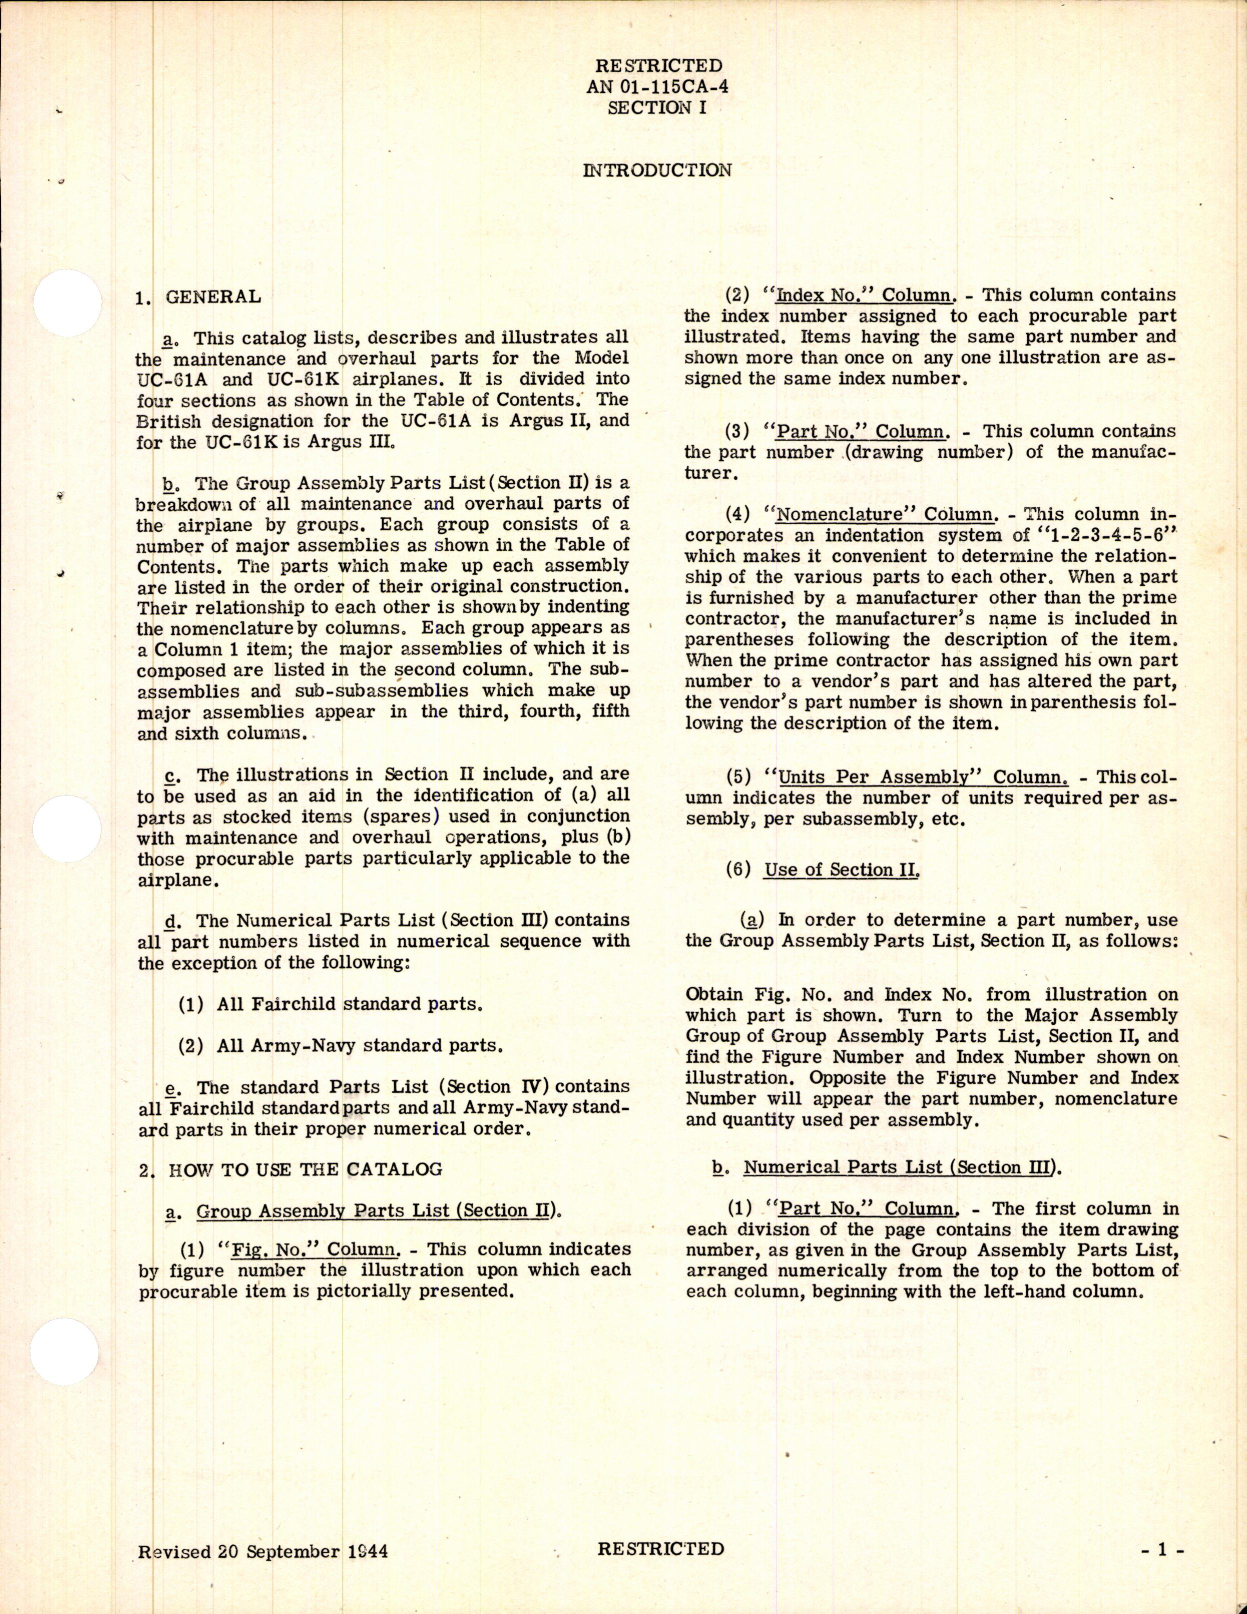 Sample page 5 from AirCorps Library document: Airplane Parts catalog for UC-61A, and UC-61K